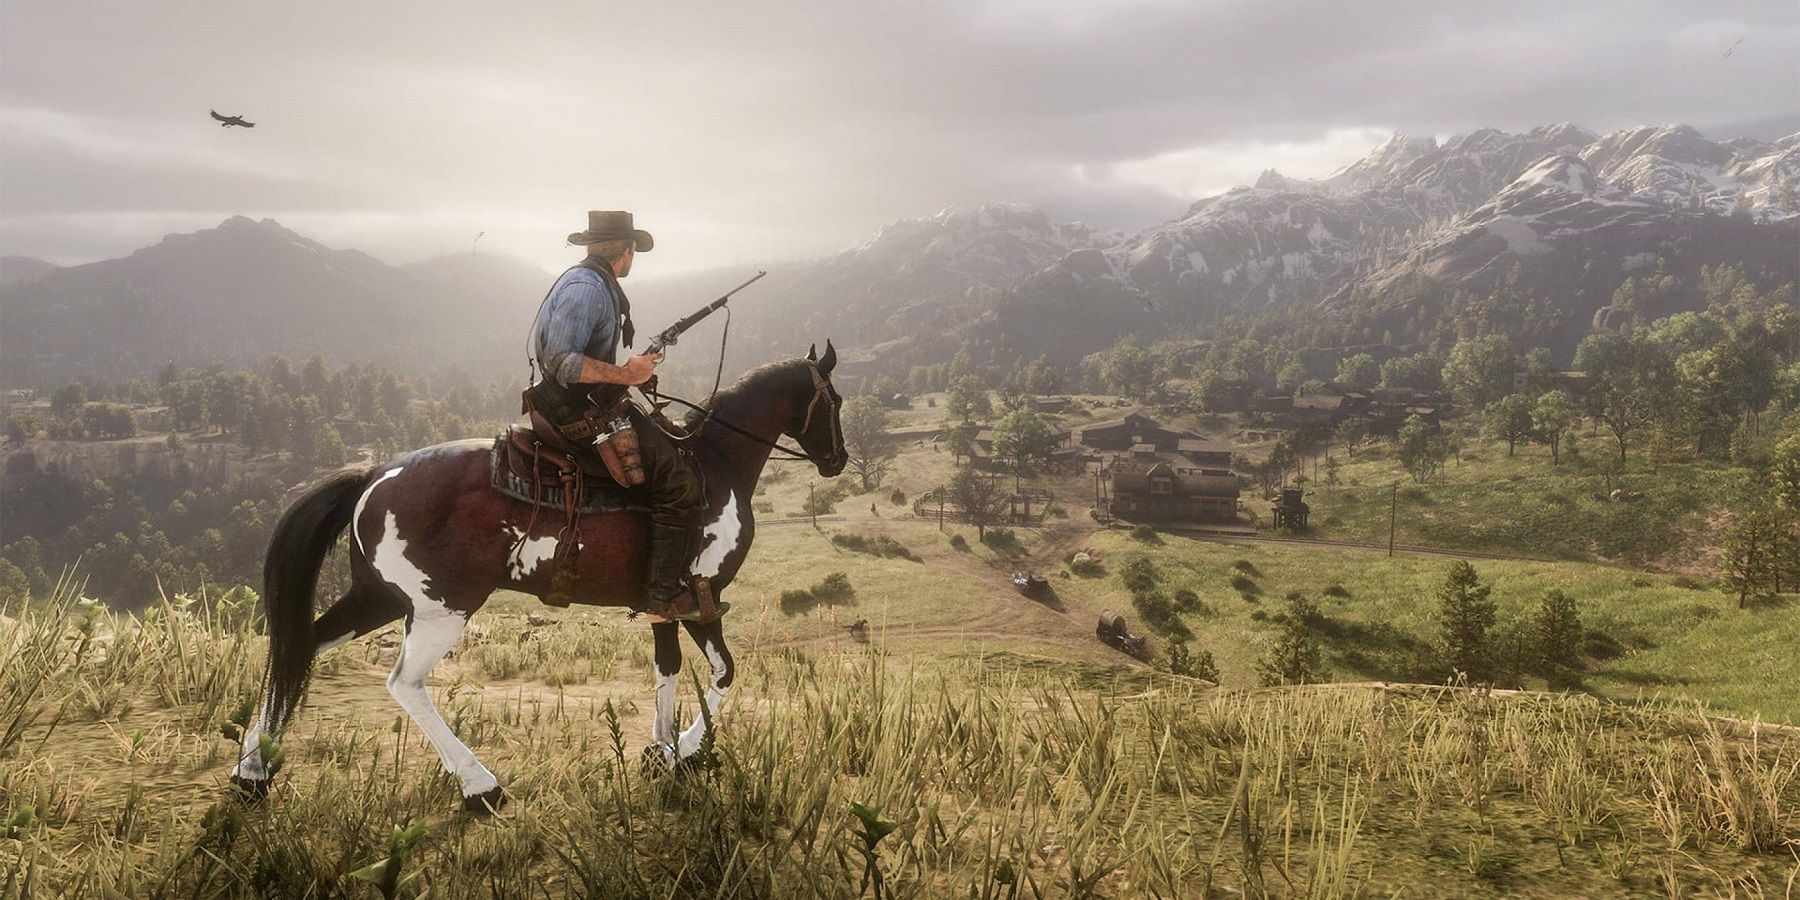 Image from Red Dead Redemption 2 showing Arthur Morgan riding on horseback through a field.